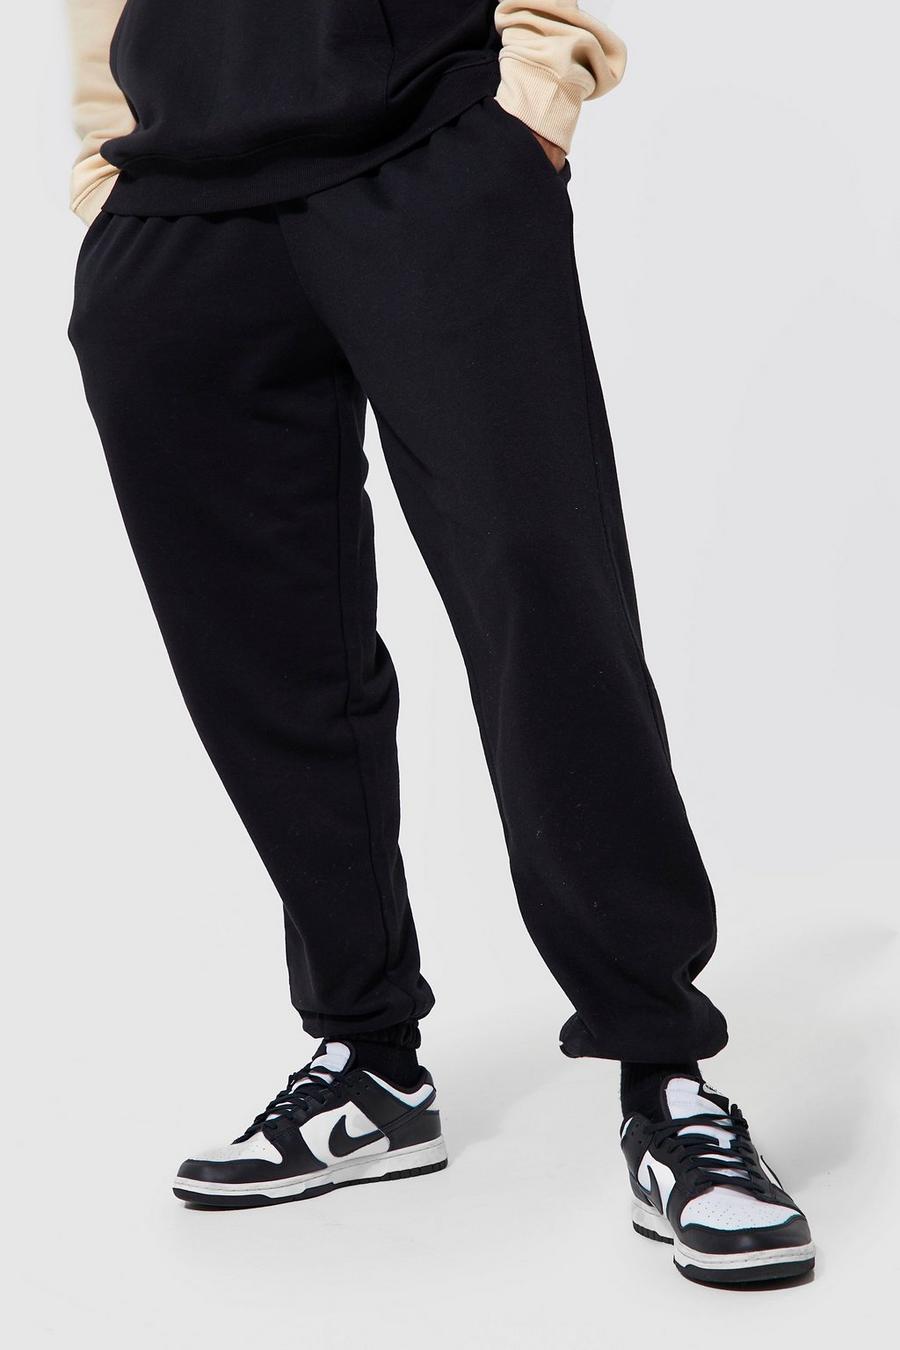 Black Tall Basic Loose Fit Jogger with REEL Cotton